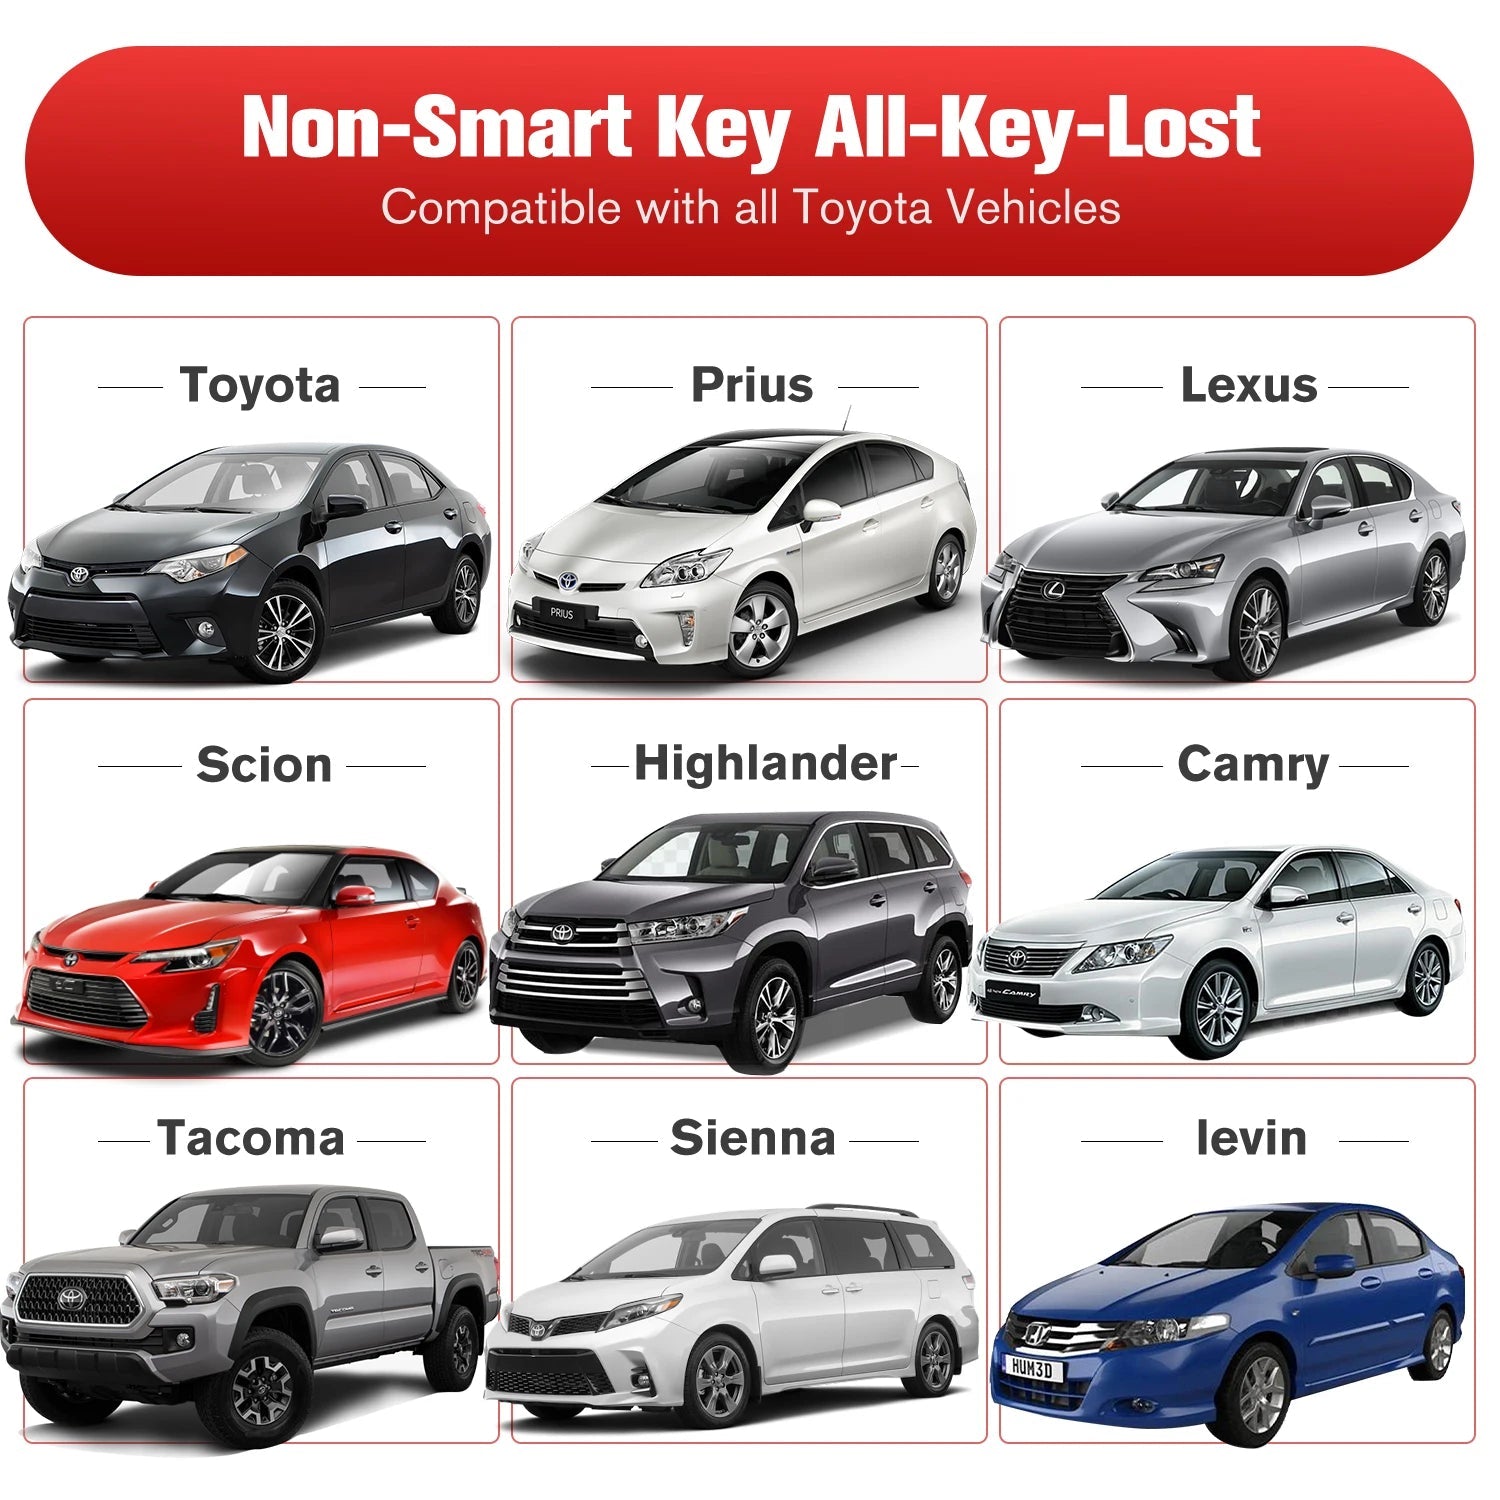 Autel Toyota 8A AKL Cable Blade Key All Keys Lost Adapter Autel Key Programming Accessory Work with IM508/ IM608 and G-Box3 - Dynamex